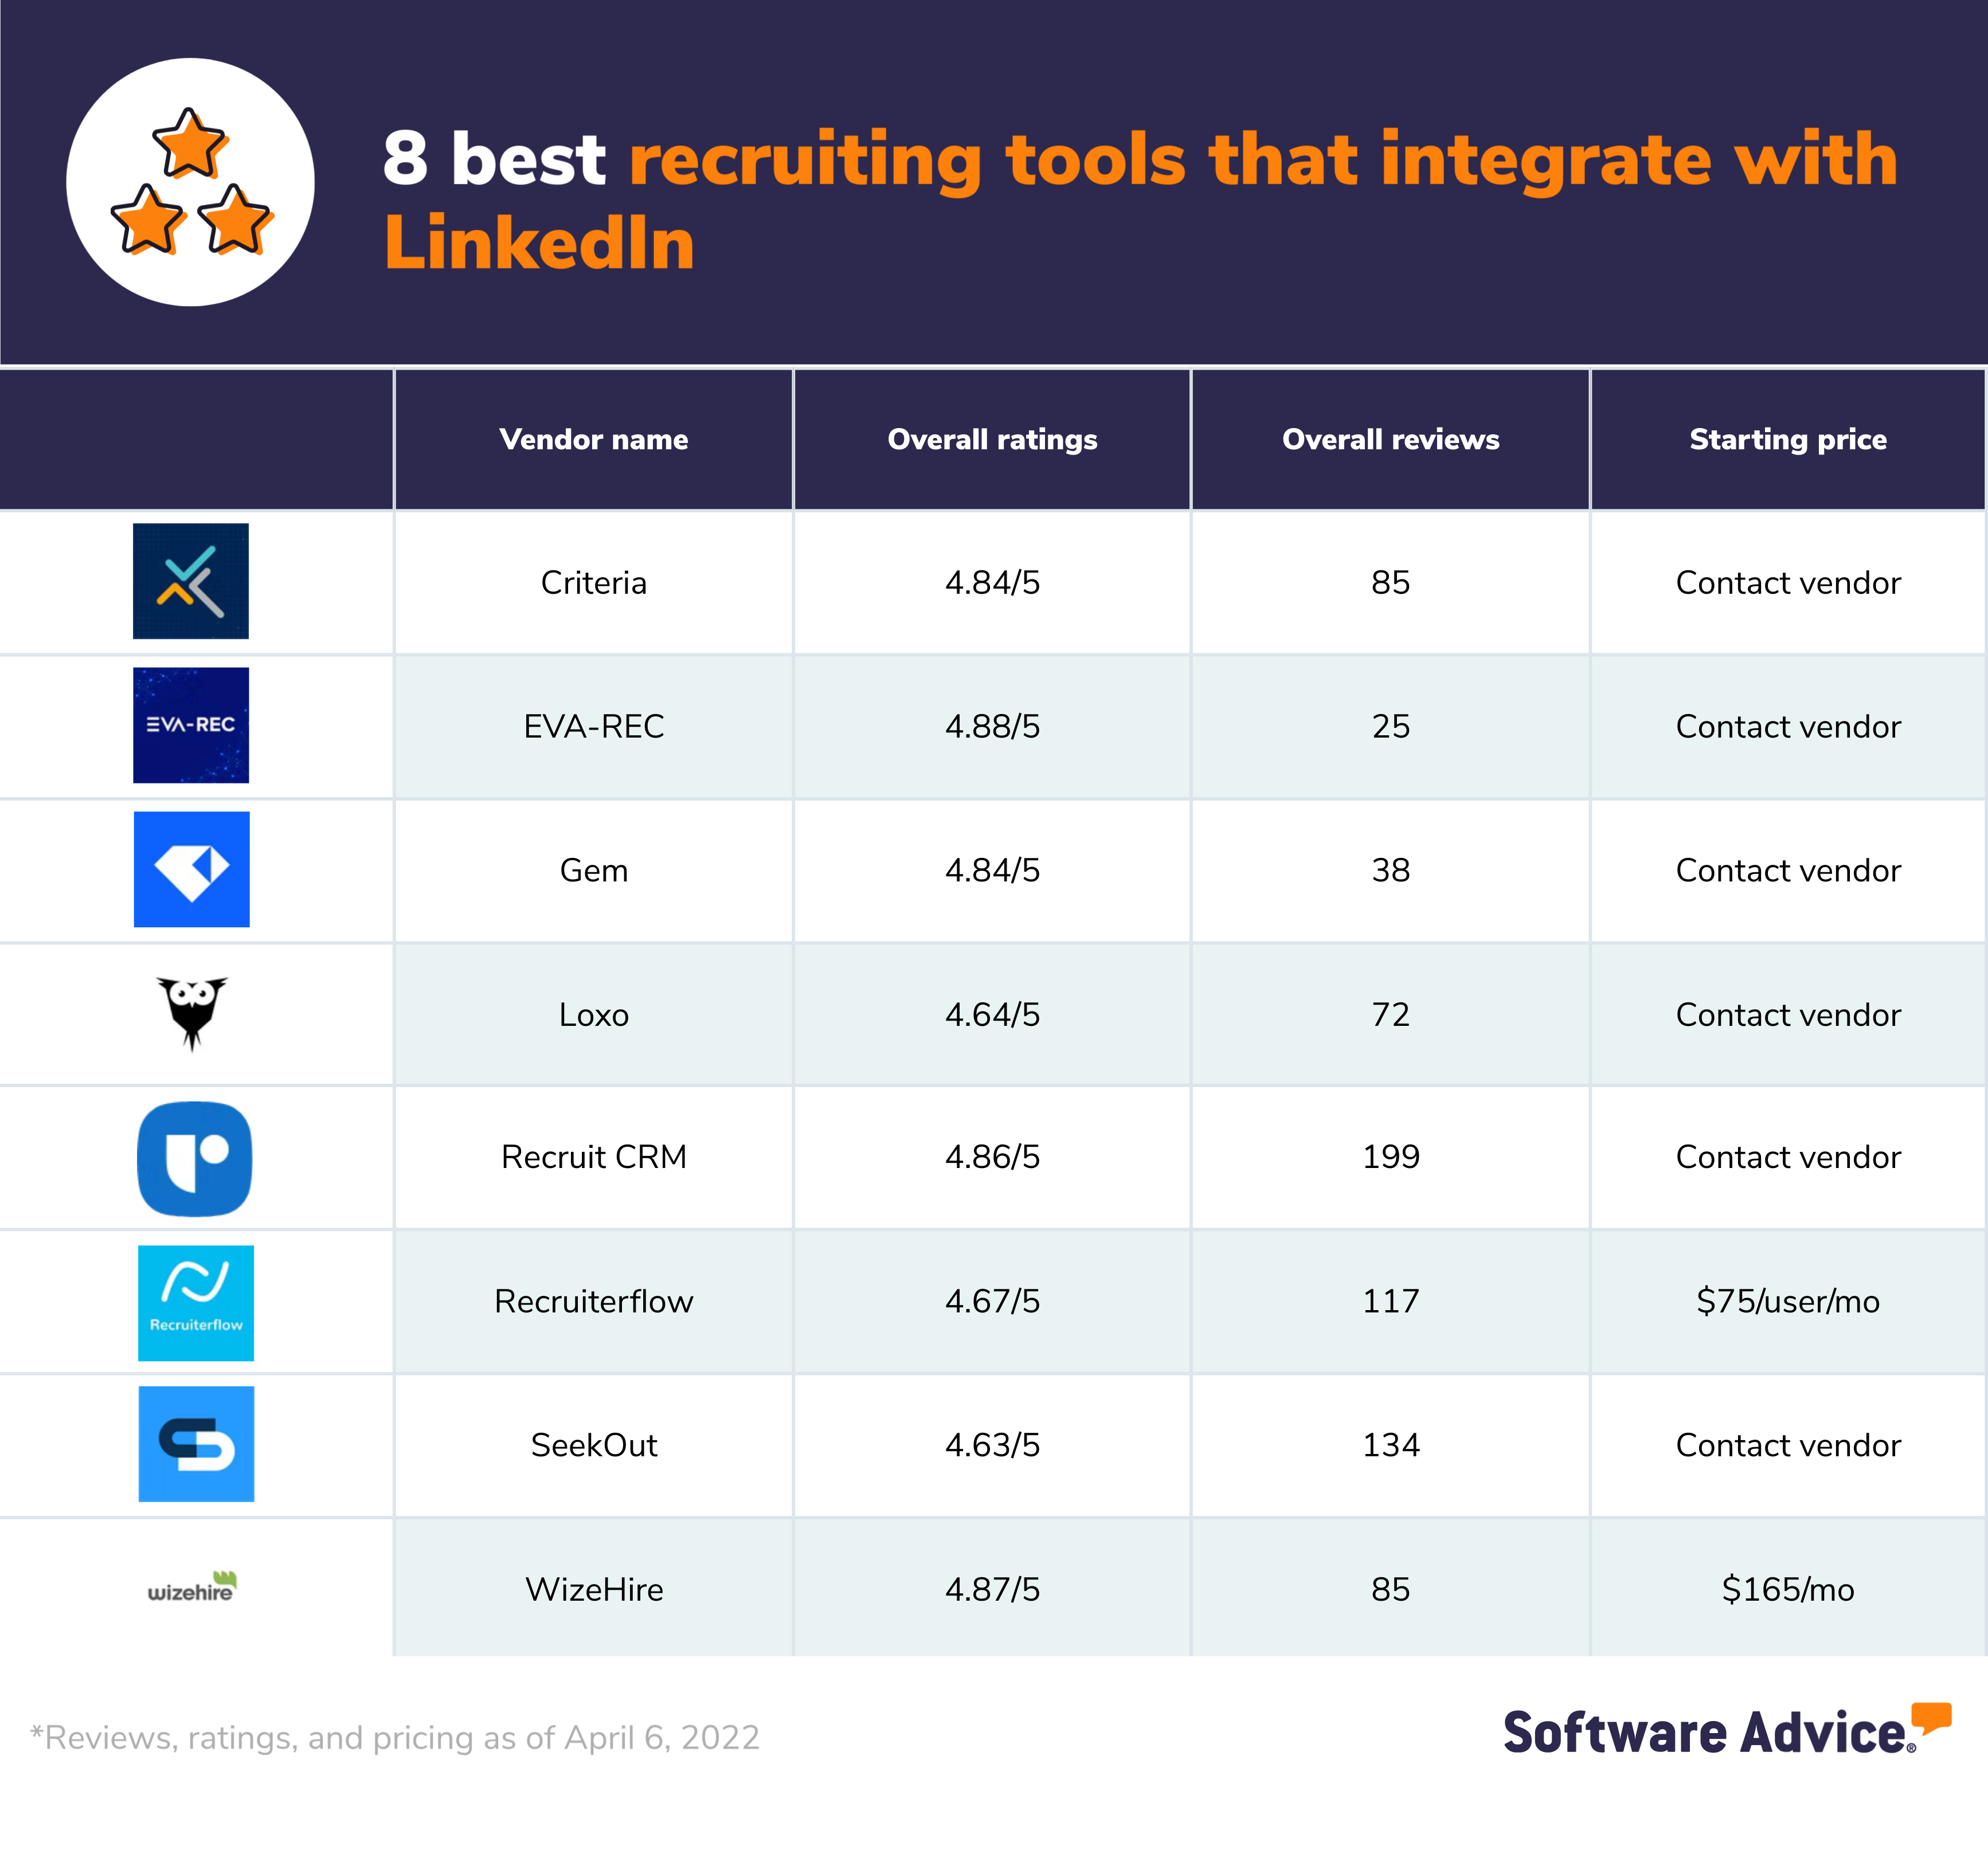 8-best-recruiting-tools-that-integrate-with-LinkedIn